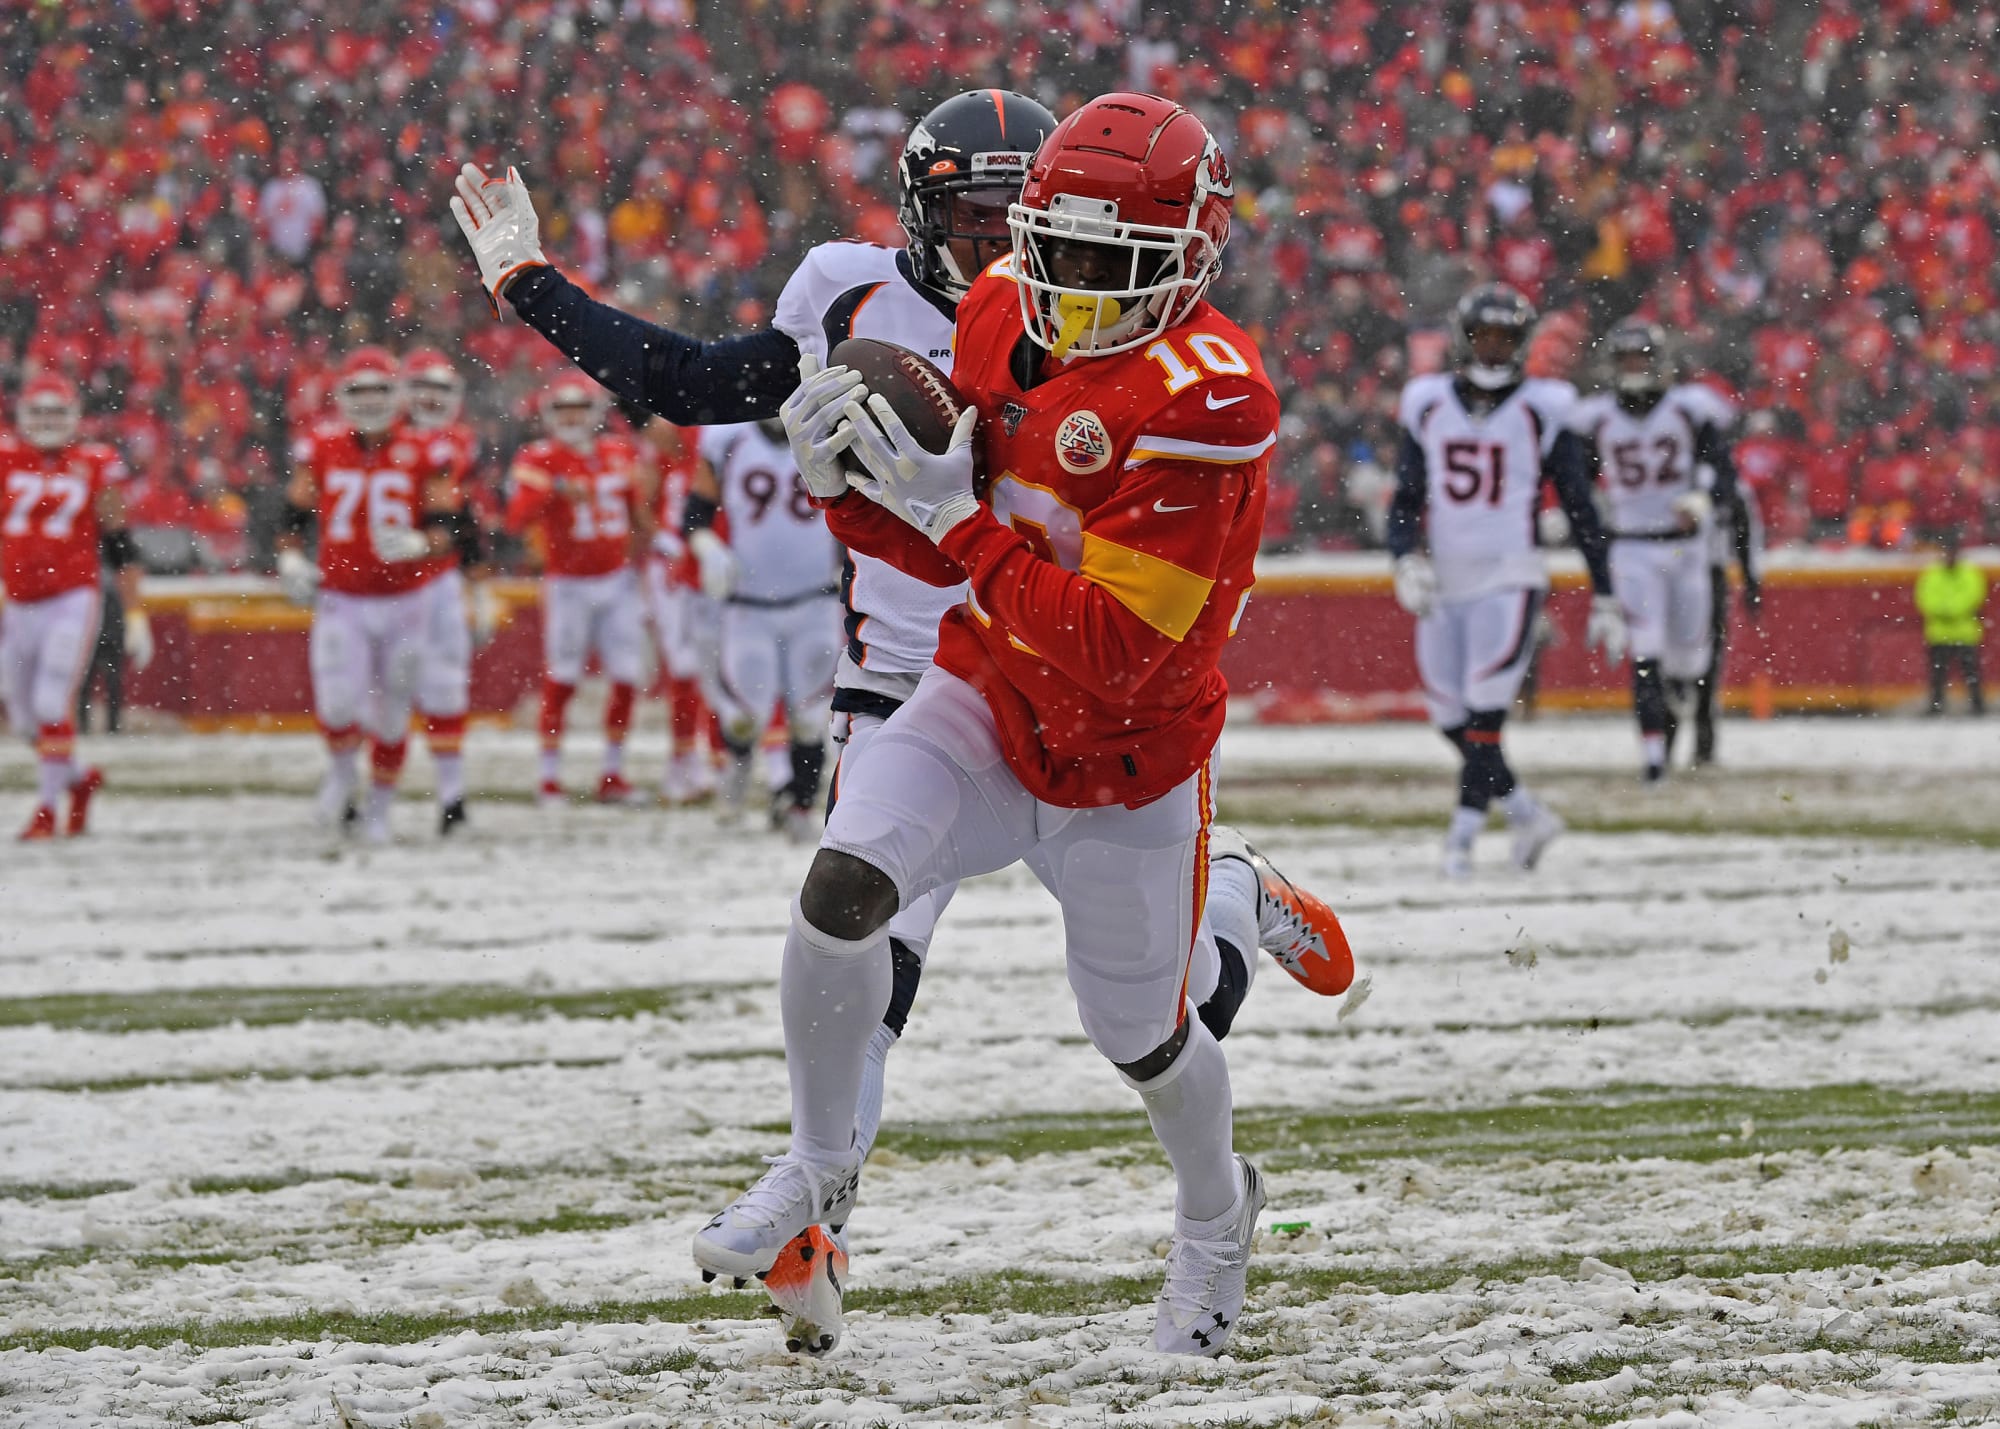 KC Chiefs: 2021 could be the last season for Frank Clark and Tyreek Hill